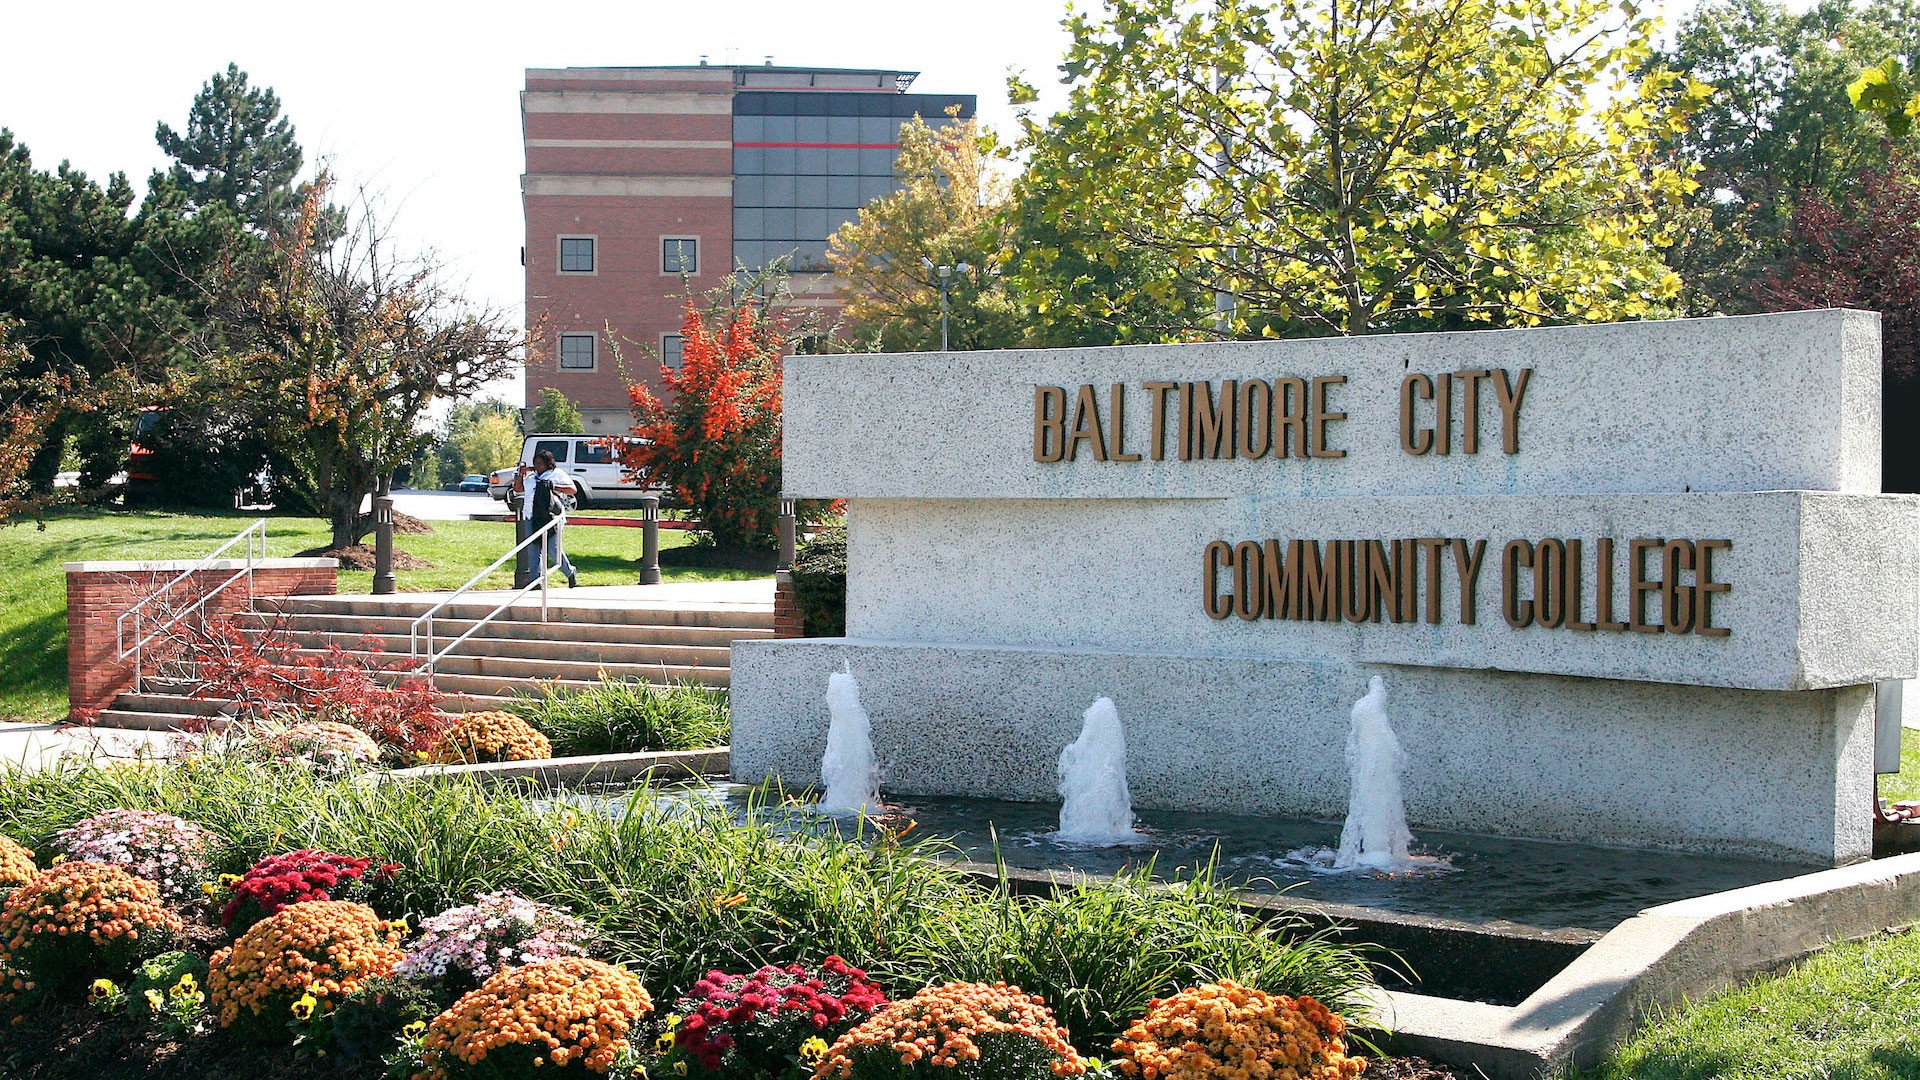 Profile for Baltimore City Community College HigherEdJobs